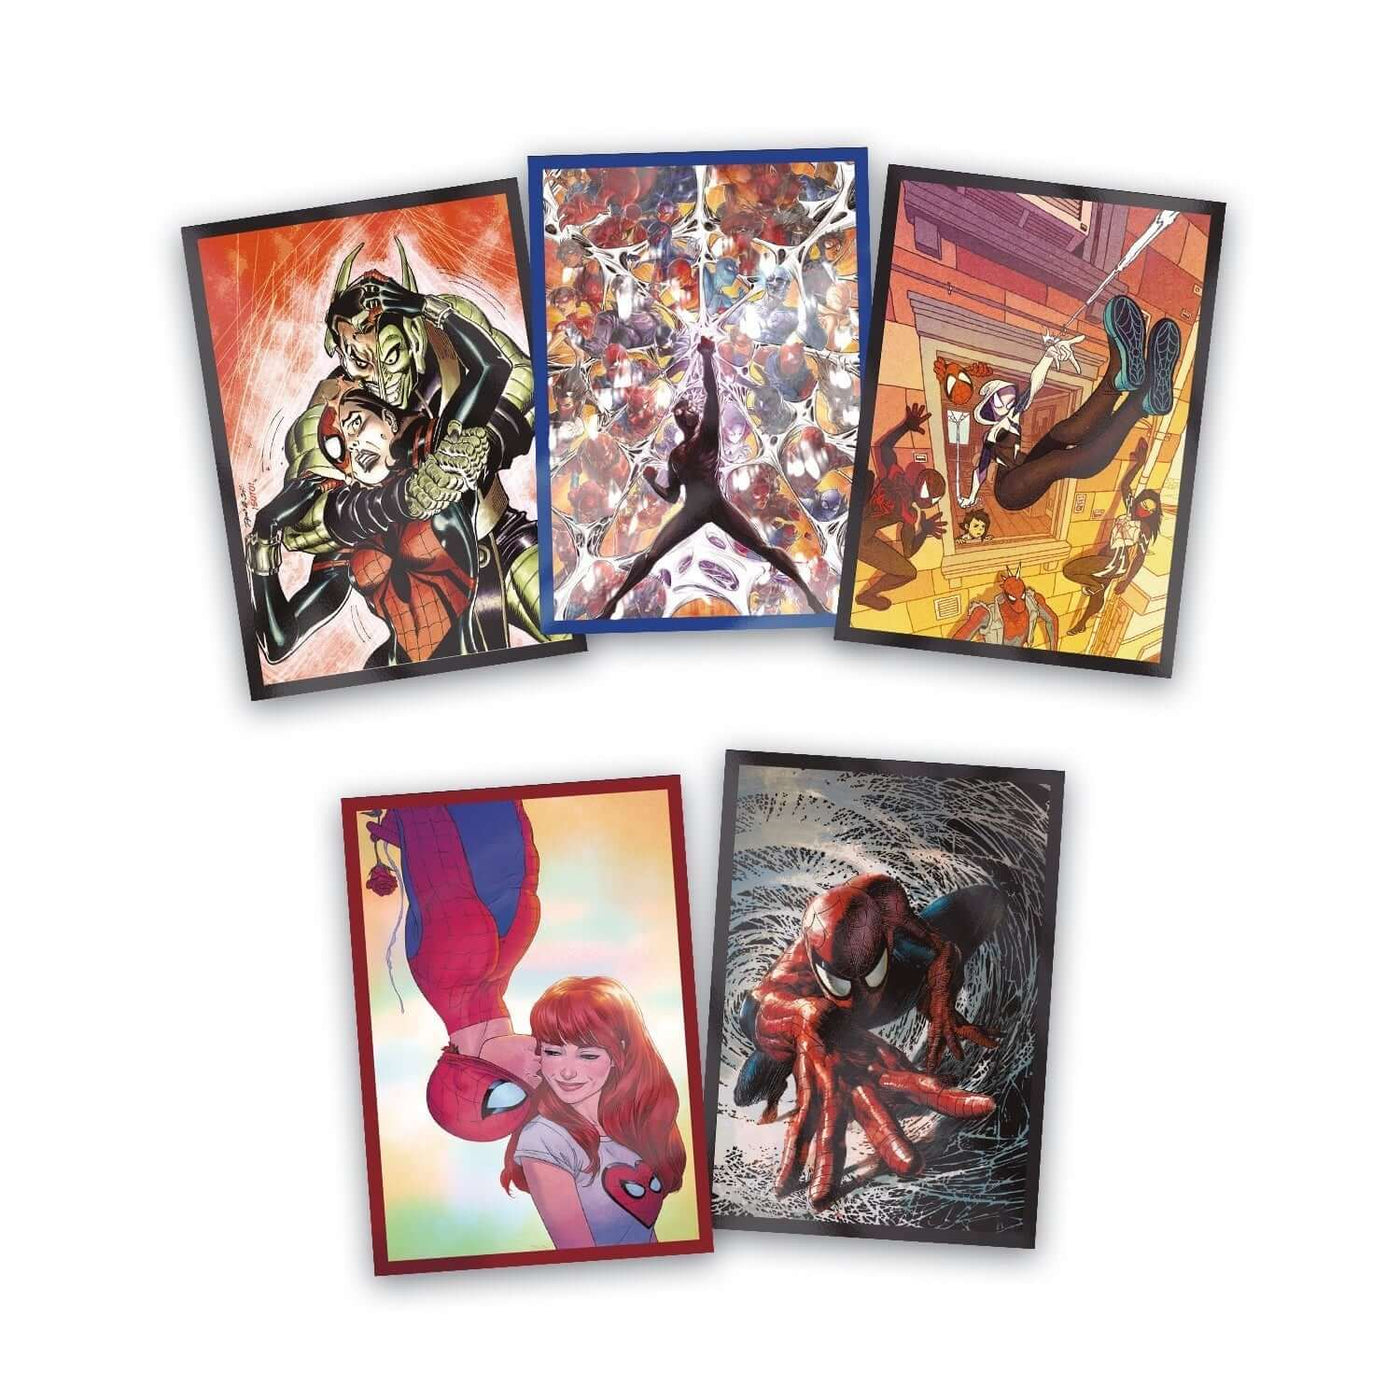 Panini Spider-Man Spider-Verse Sticker Collection Product: Packs Sticker Collection Earthlets